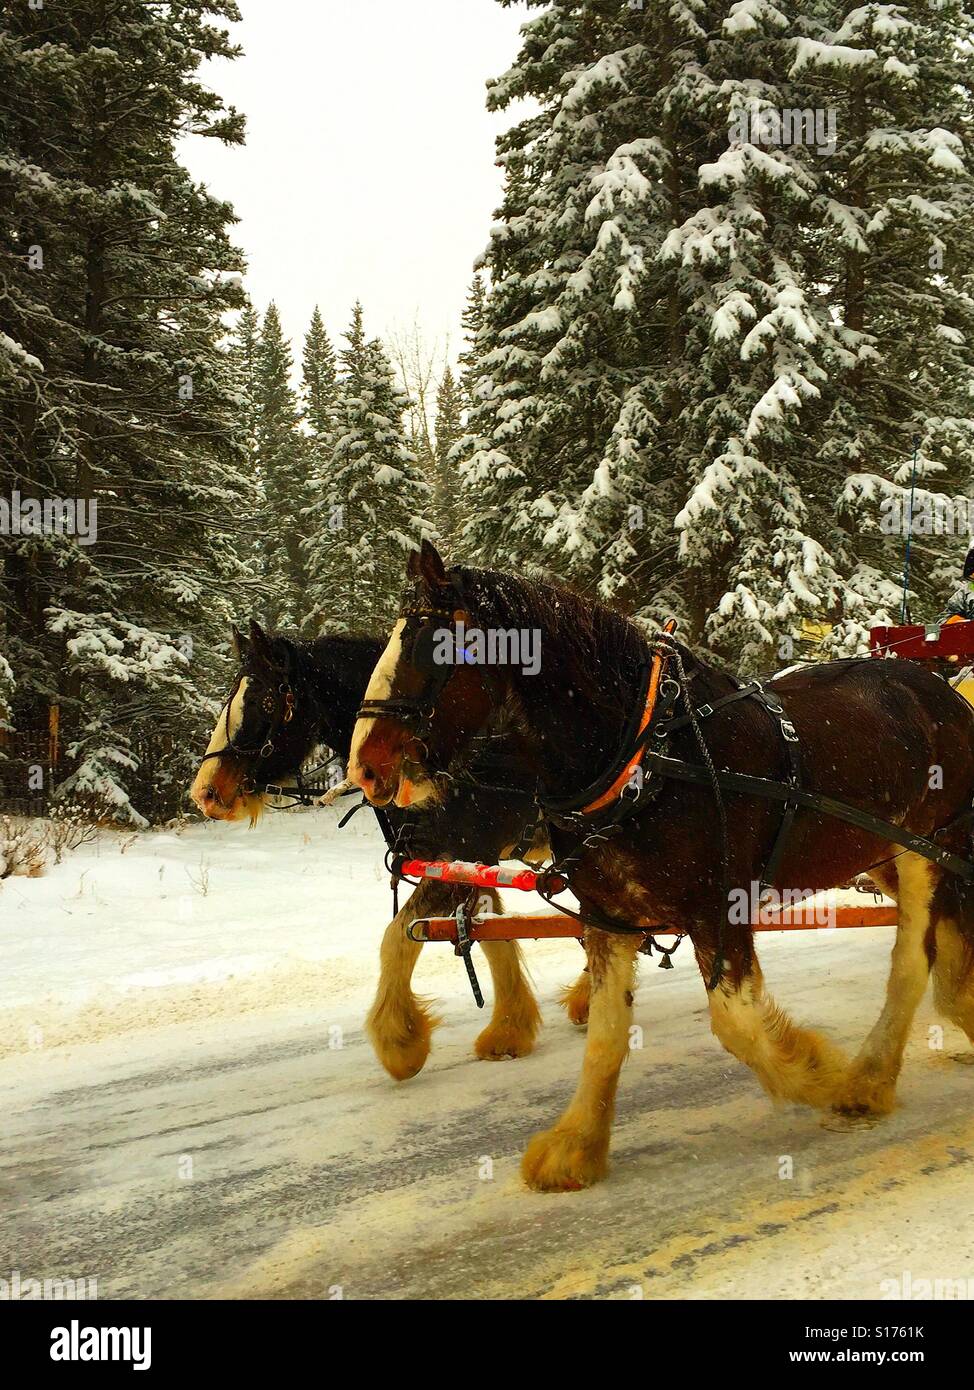 Team of work horses pulling a wagon on a snowy day Stock Photo